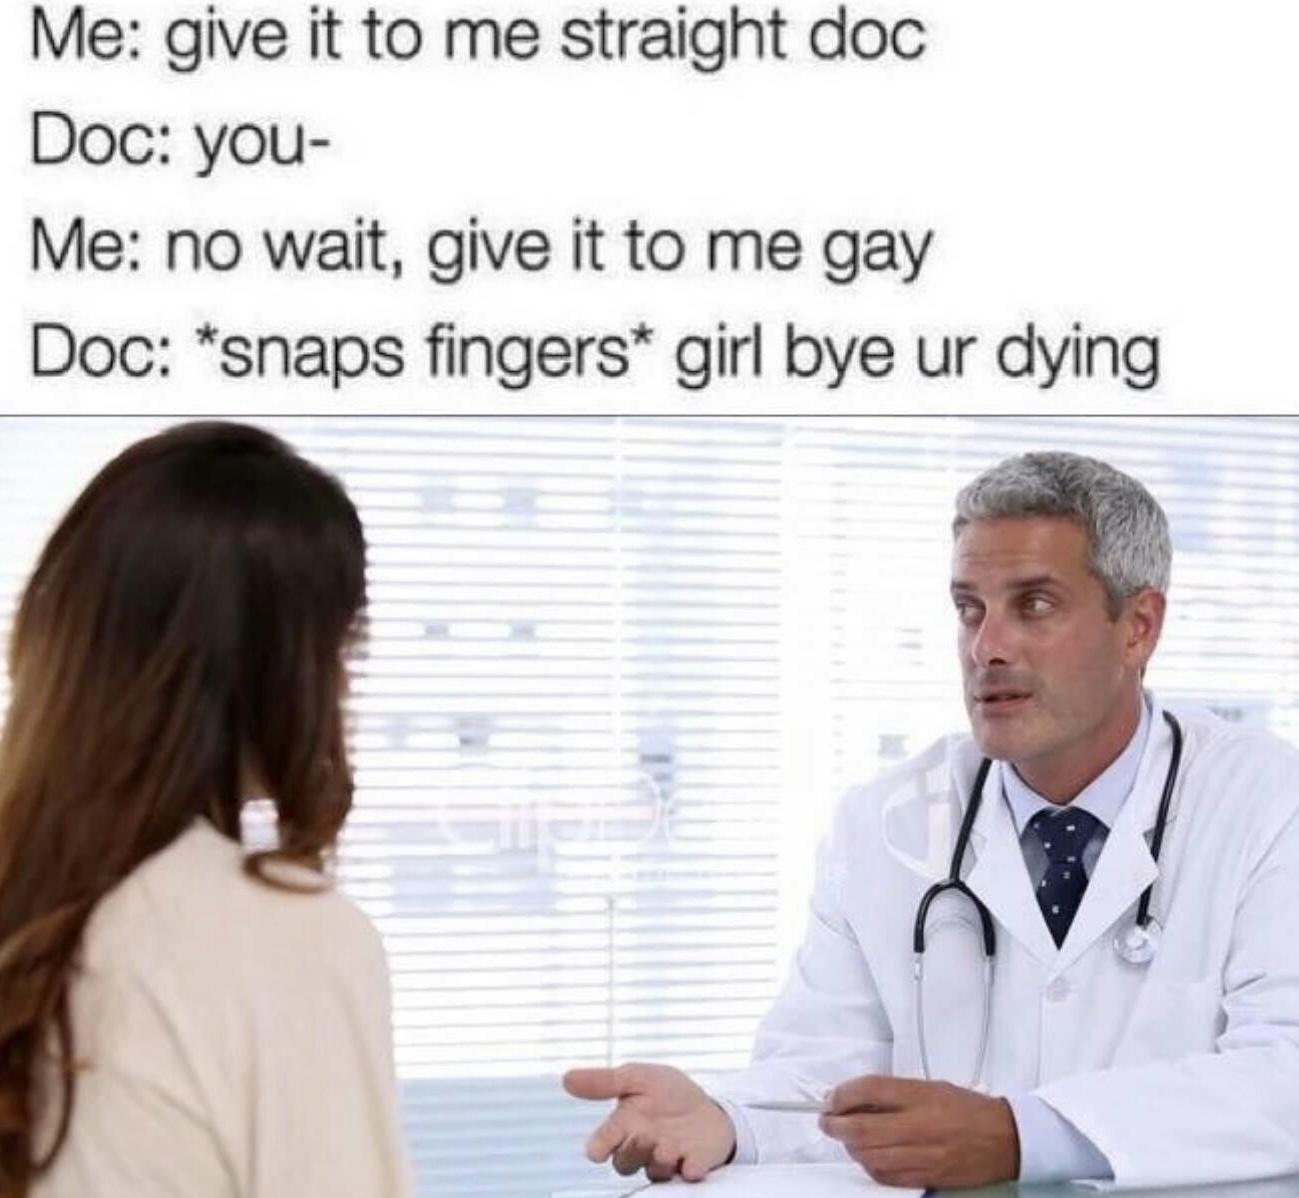 fresh memes - give it to me straight doc meme - Me give it to me straight doc Doc you Me no wait, give it to me gay Doc snaps fingers girl bye ur dying F